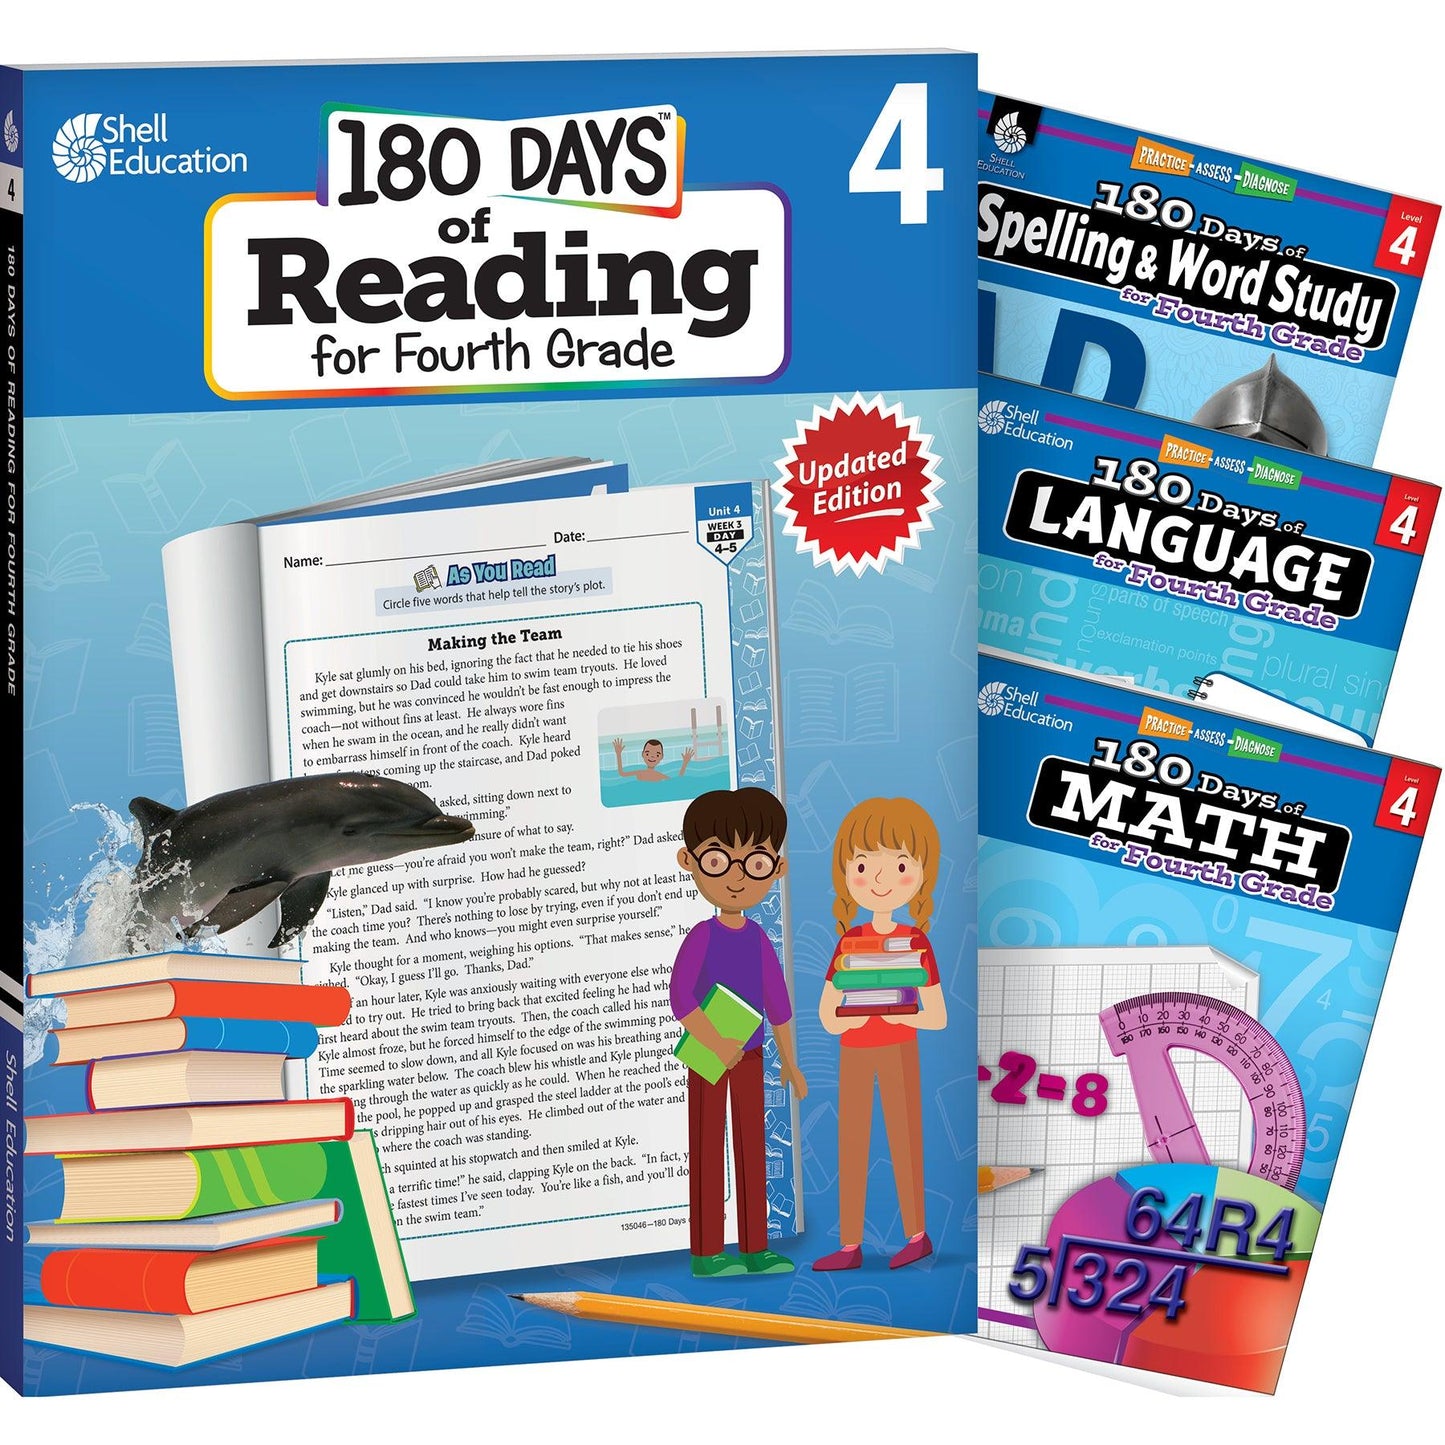 180 Days of Practice Reading, Spelling, Language, & Math for Forth Grade: 4-Book Set